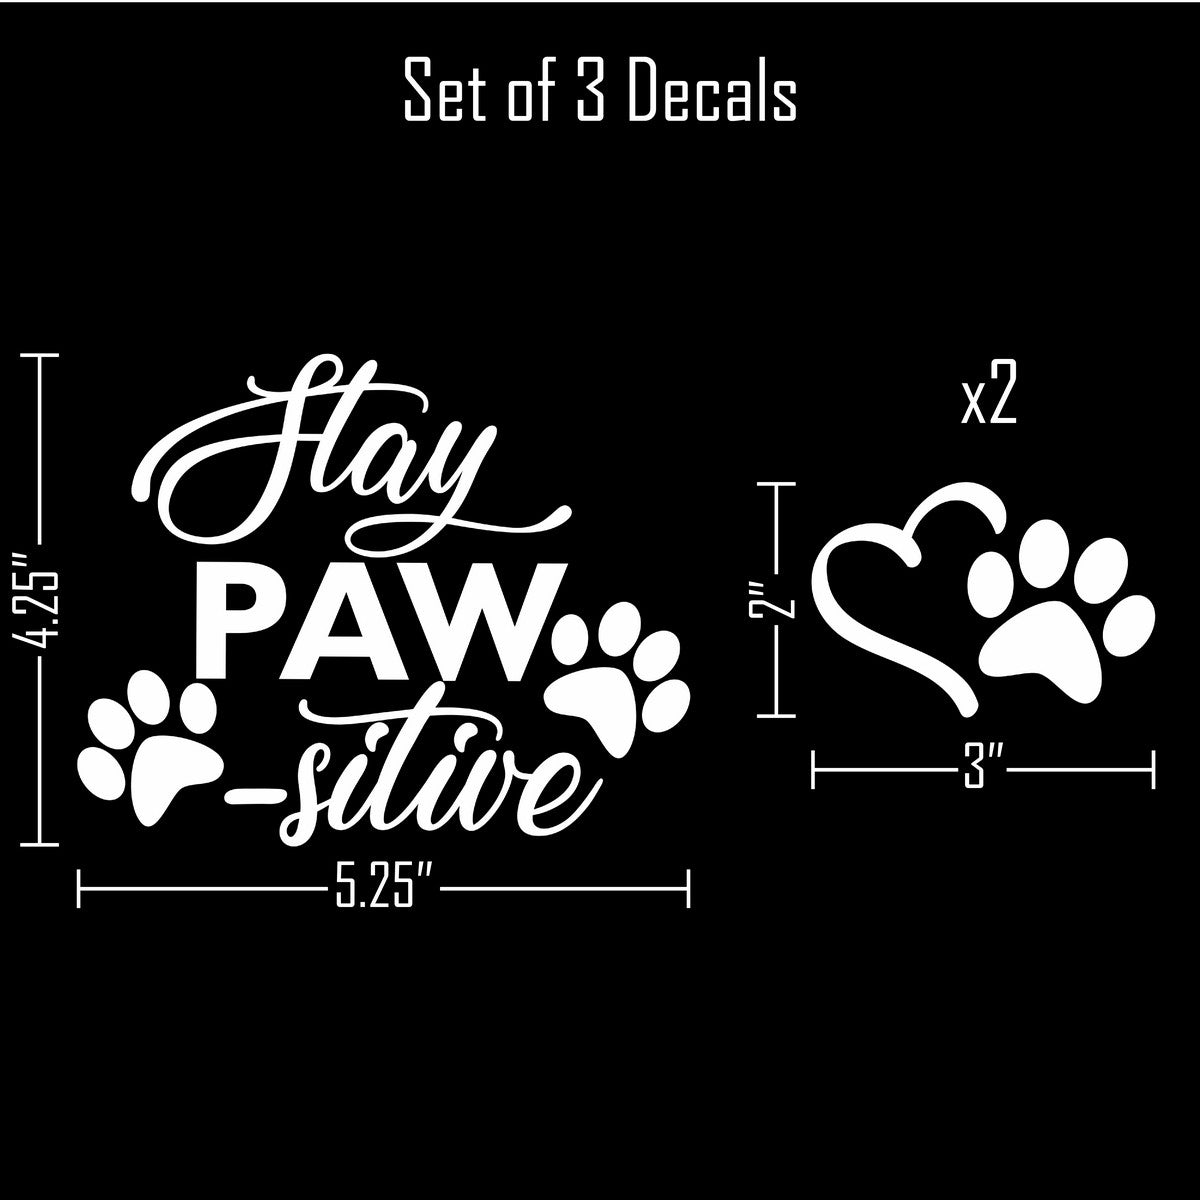 Stay Paw-sitive